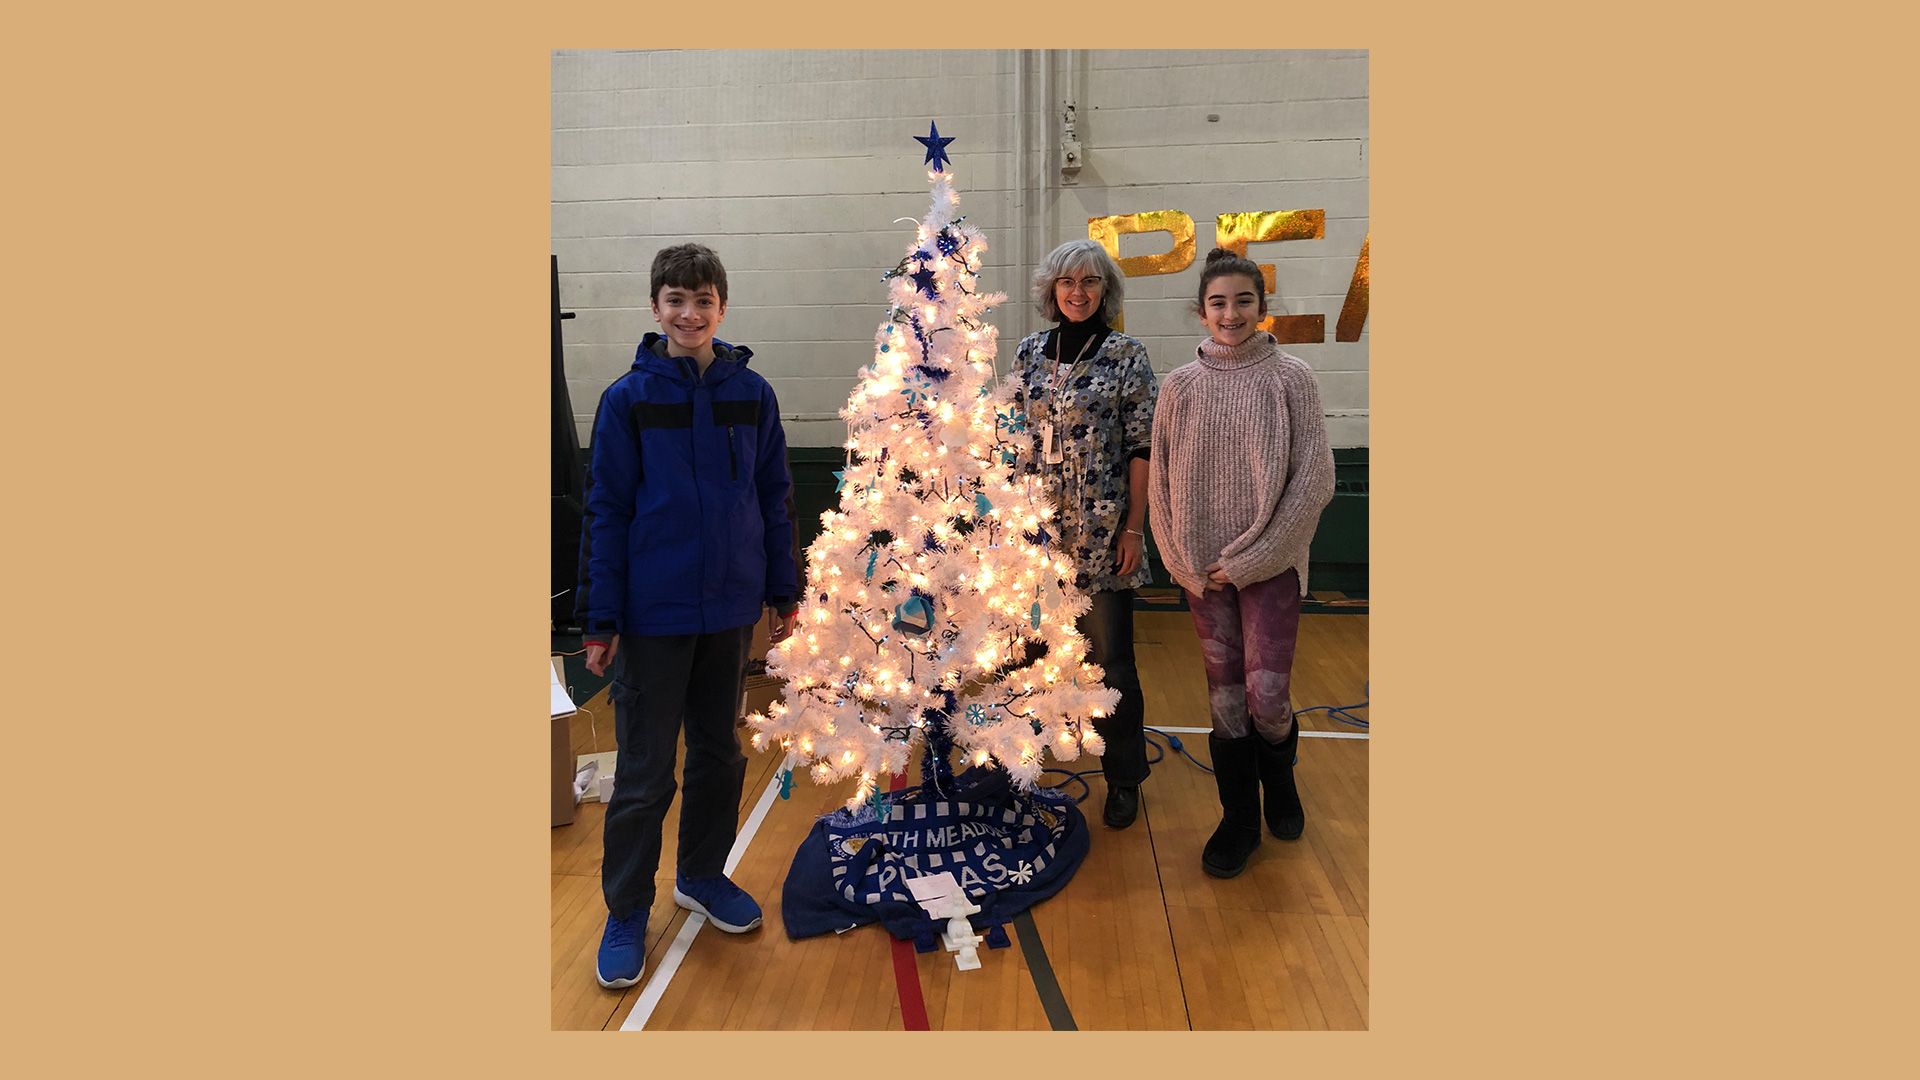 Teacher Michele Brezovec stood with 2 students and a tree decorated with 3D printed ornaments.